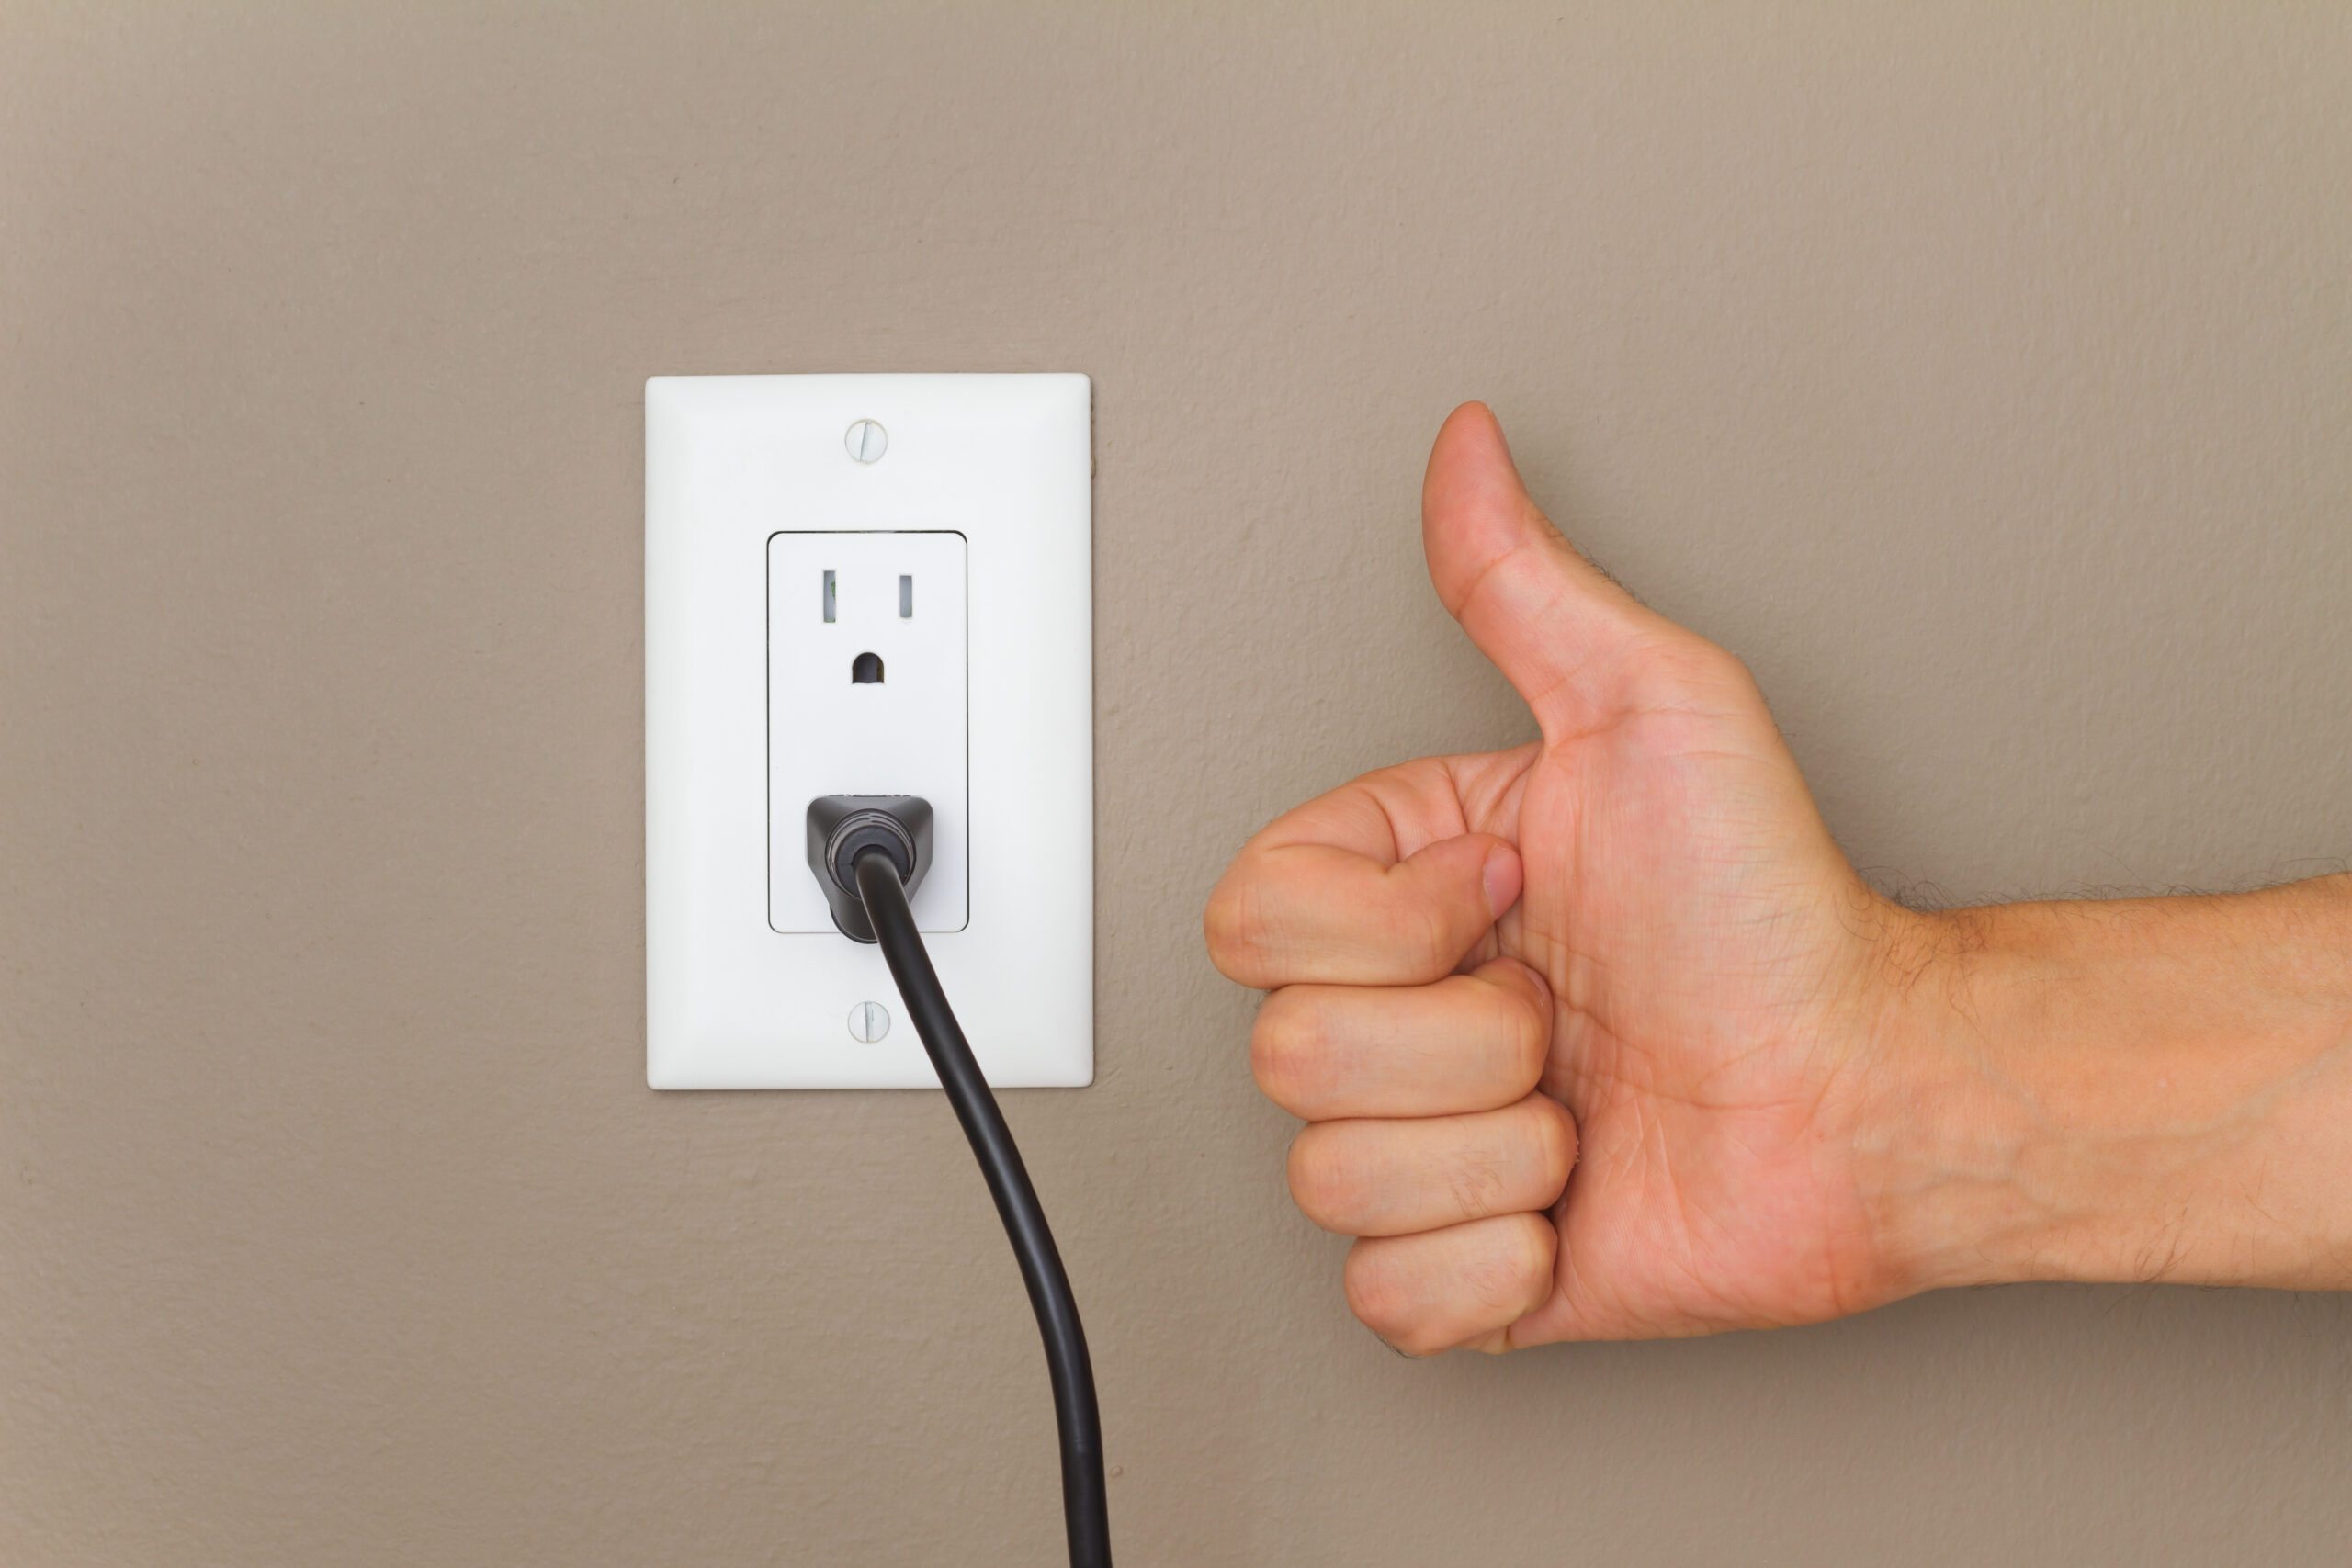 Wall outlet with something plugged in and a thumbs up